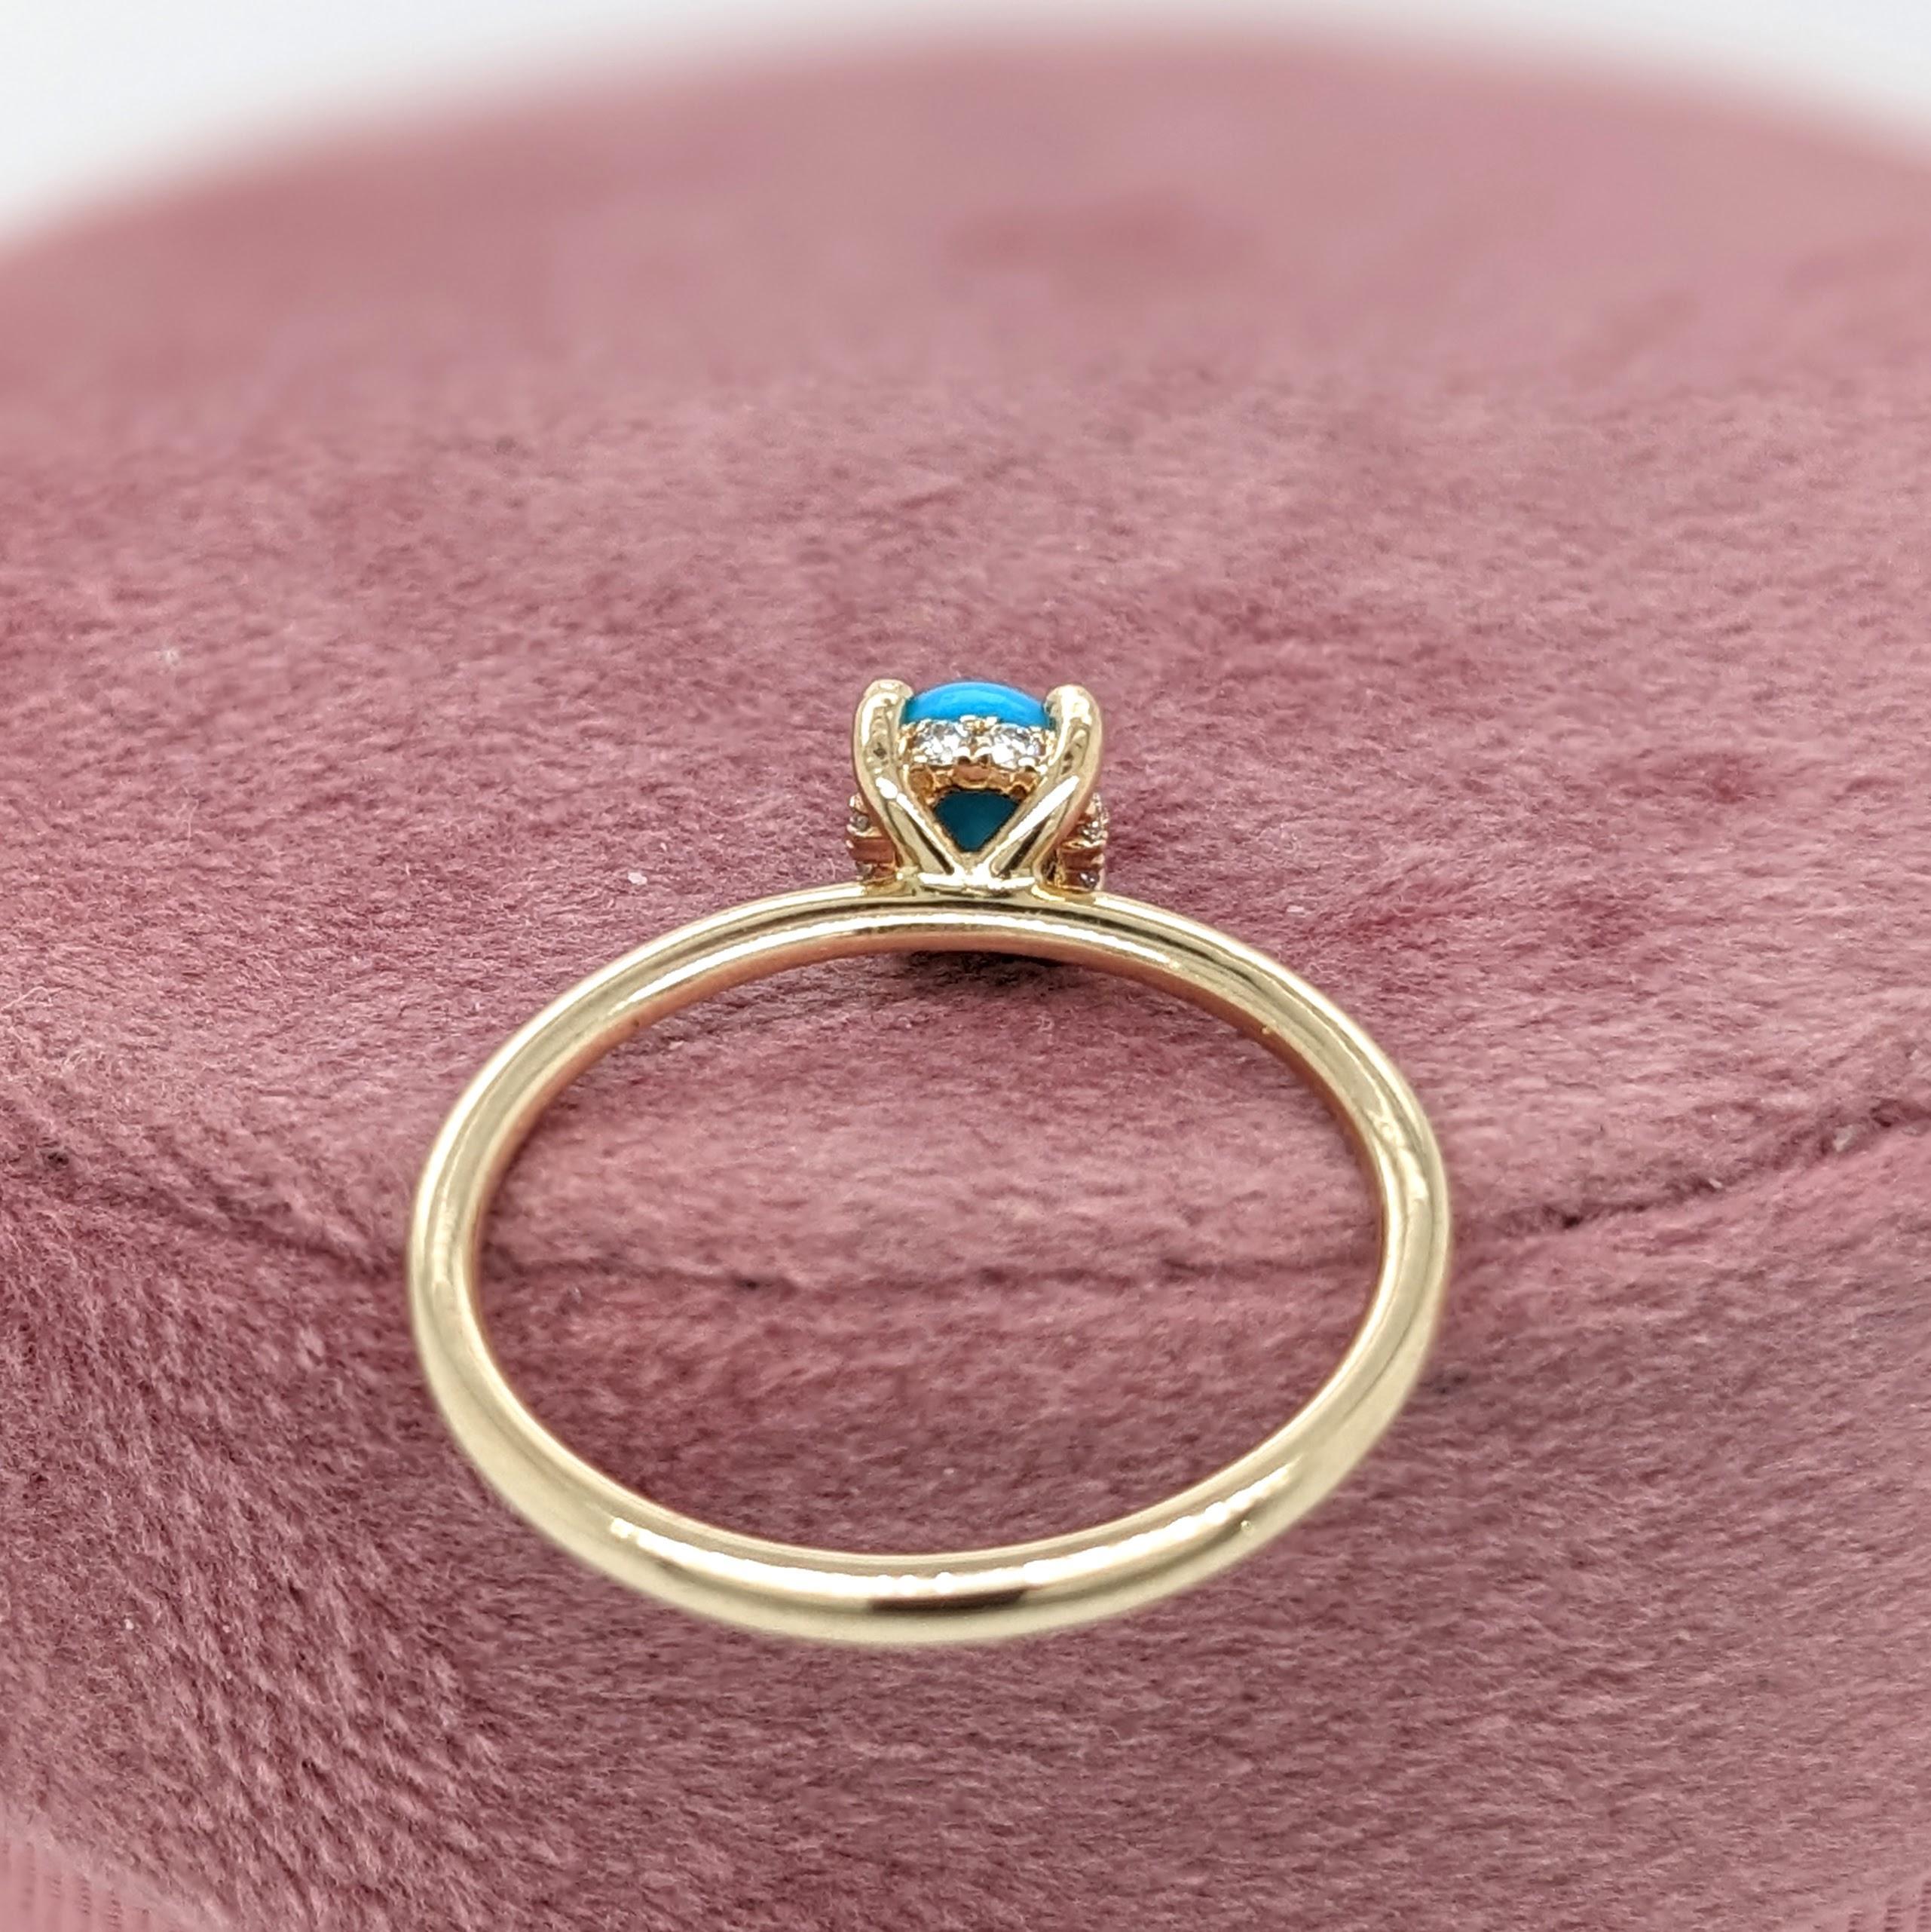 Women's Turquoise Ring w Earth Mined Diamonds in Solid 14K Yellow Gold Round 5mm